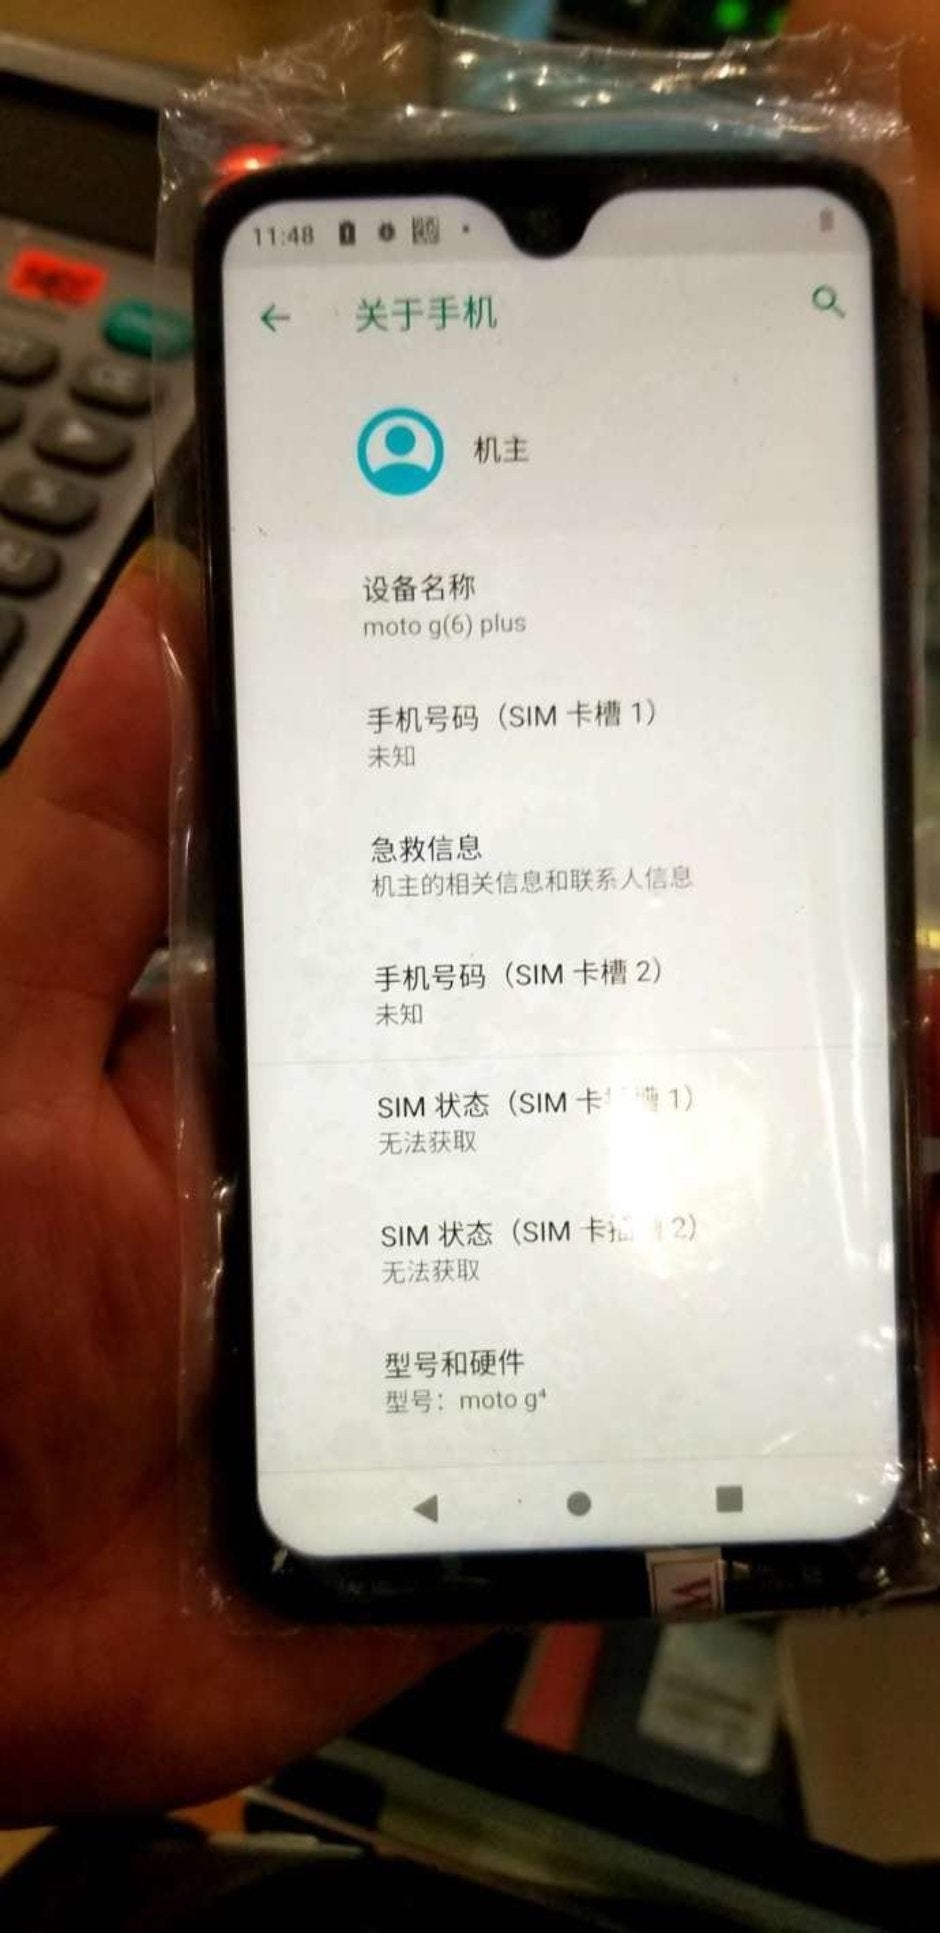 Moto G6 Plus with Snapdragon 660 - Alleged Motorola One and Moto G6 Plus with notch leaked in live pictures